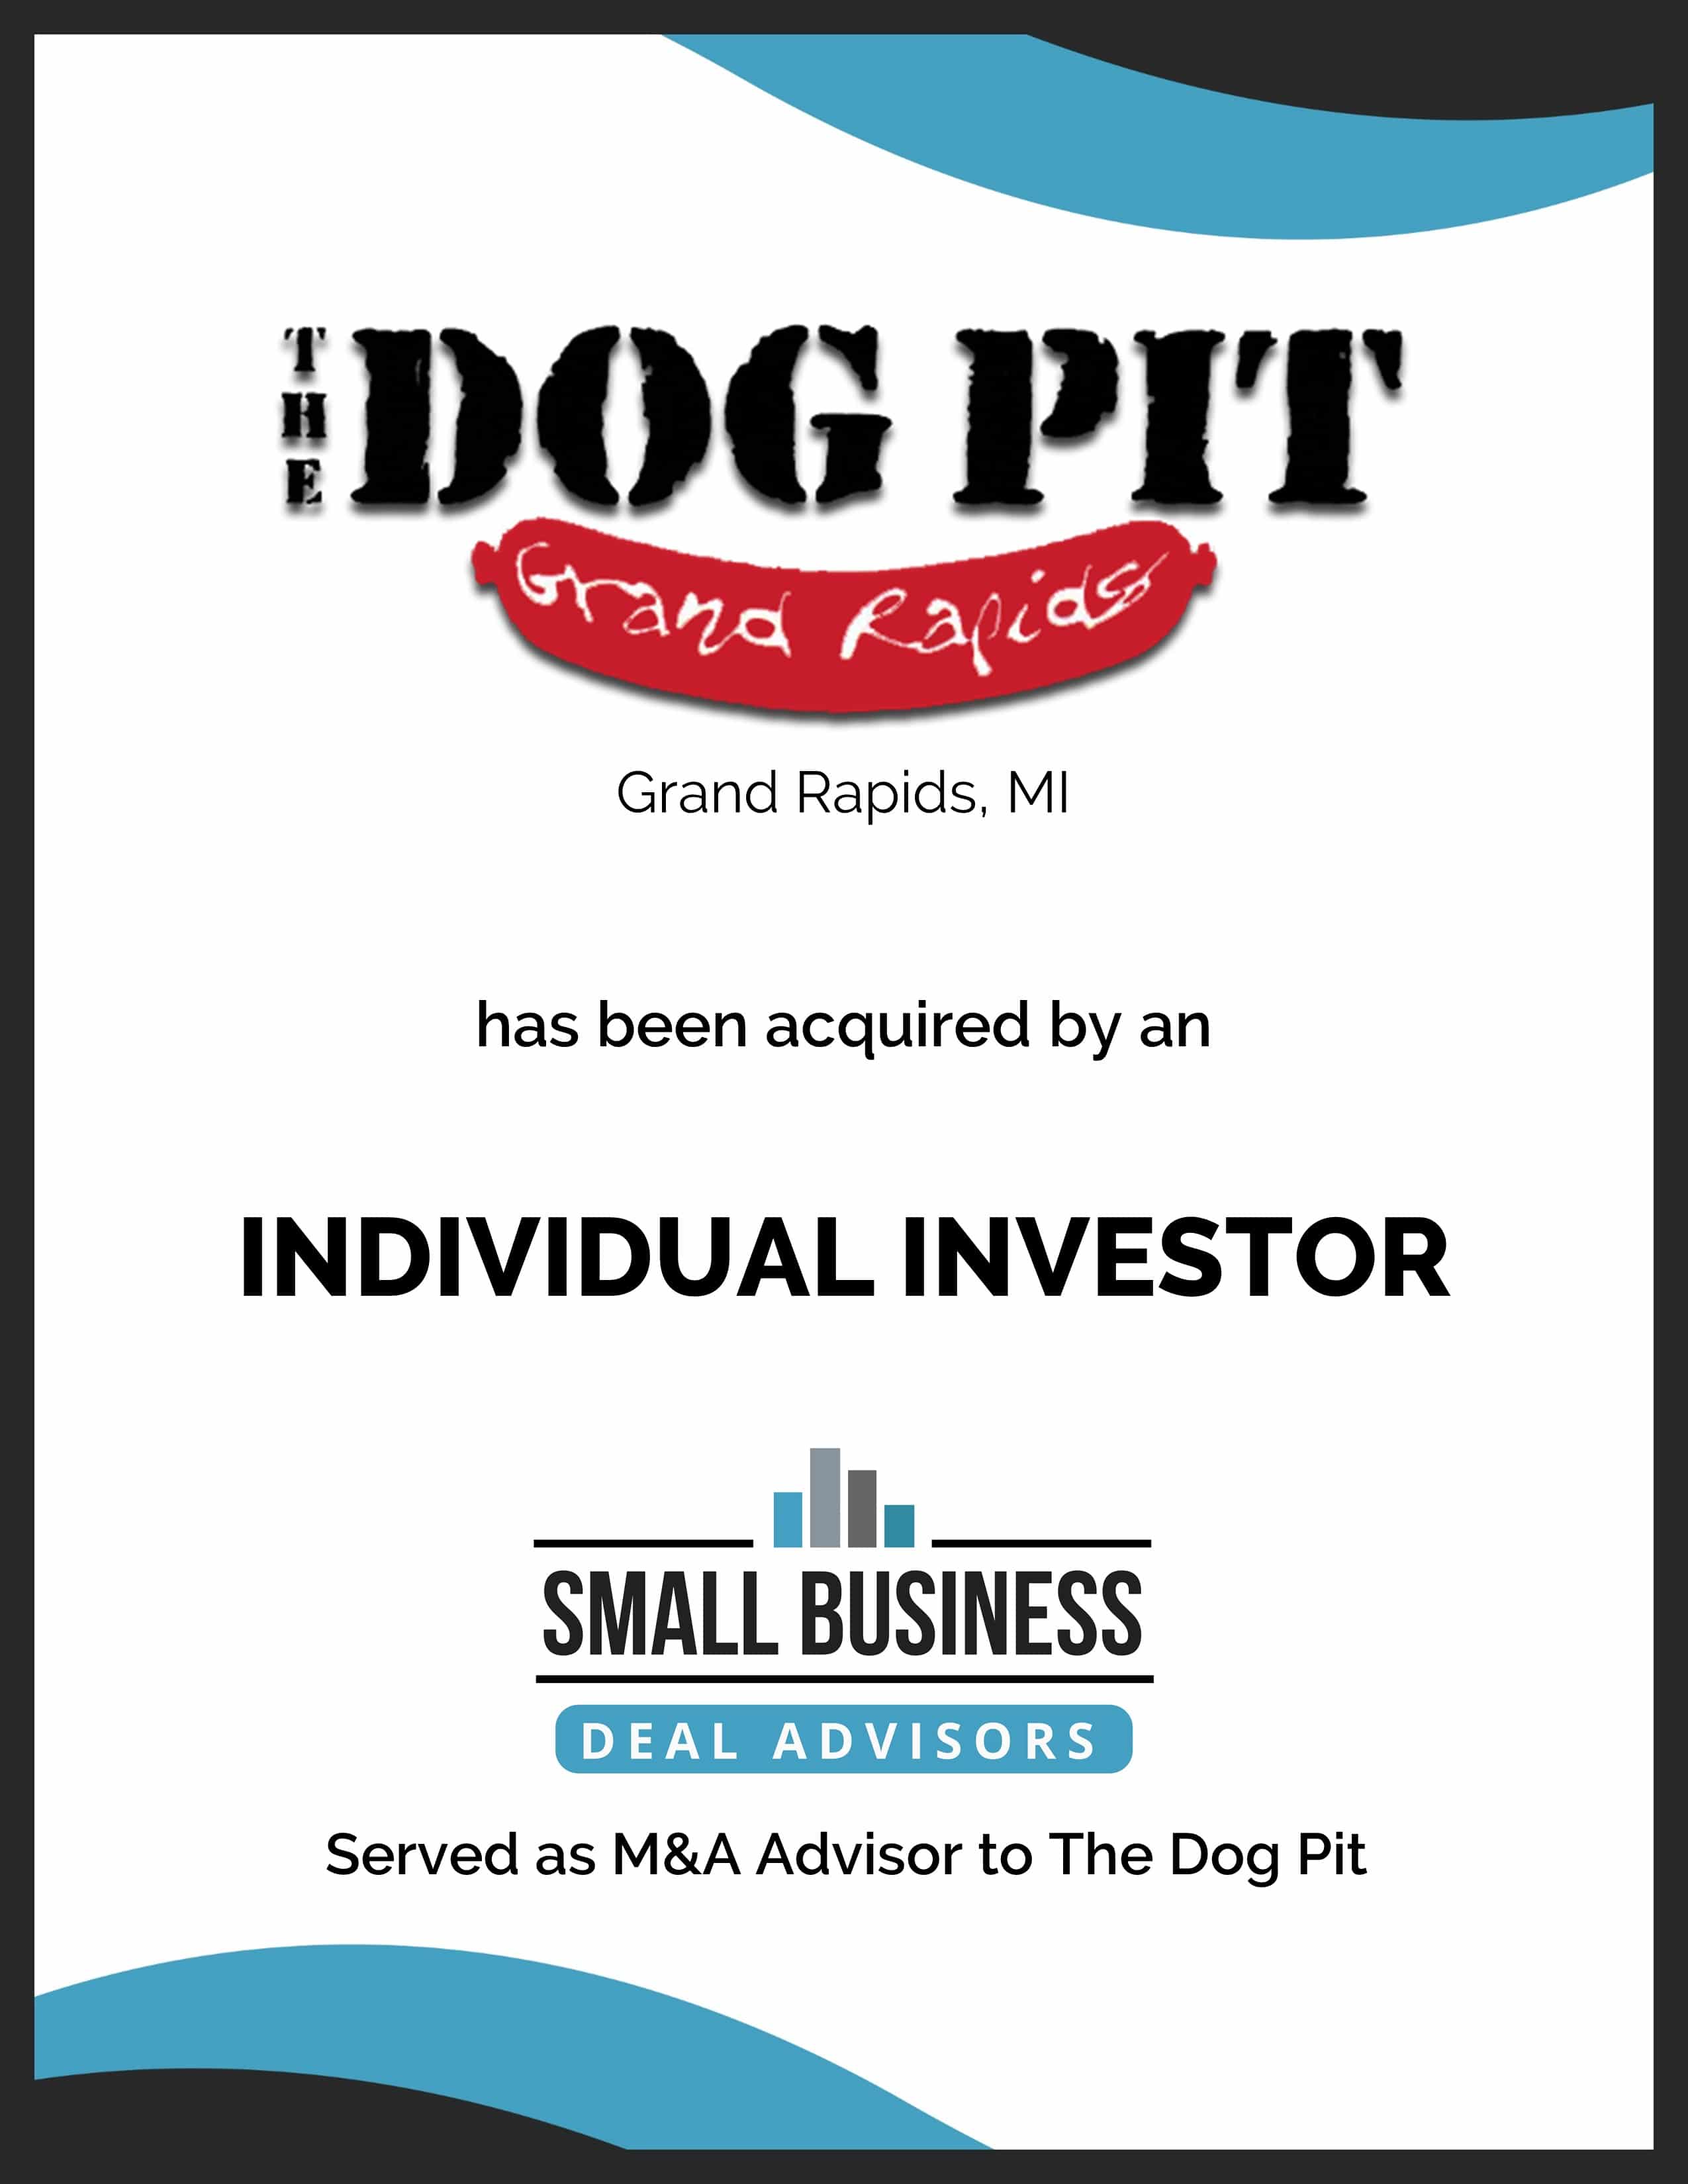 The Dog Pit has been acquired by an individual investor